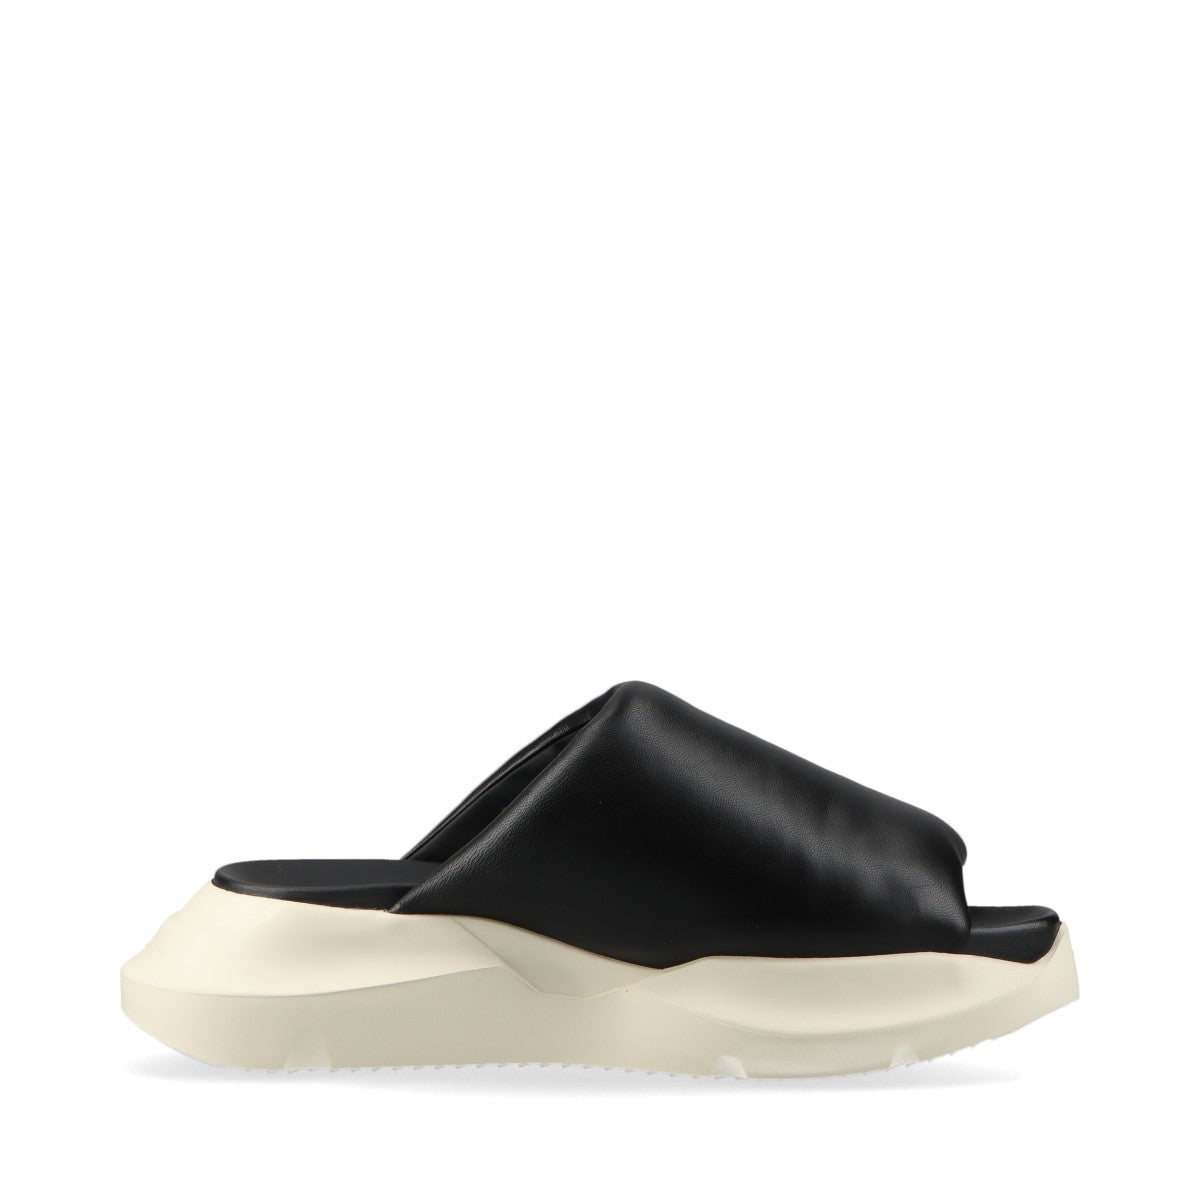 Rick Owens GETH PUFFER 23SS Leather Sandals 42 Men's Black × White 01D3817 Box There is a storage bag